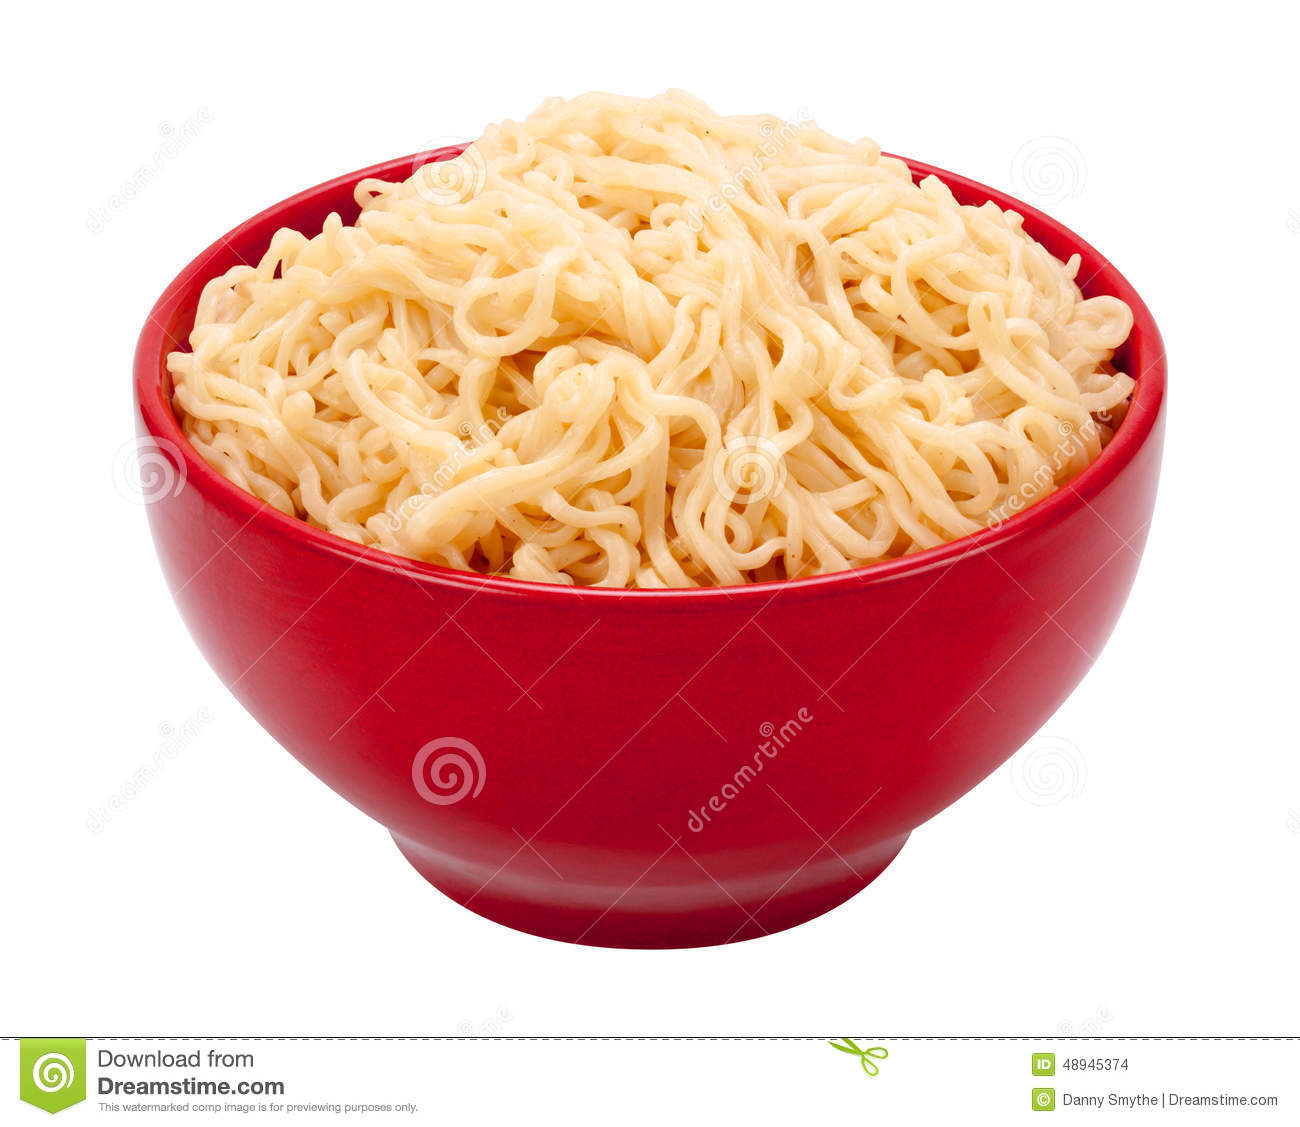 Ramen Noodles In A Red Bowl  Isolated On White With A Clipping Path